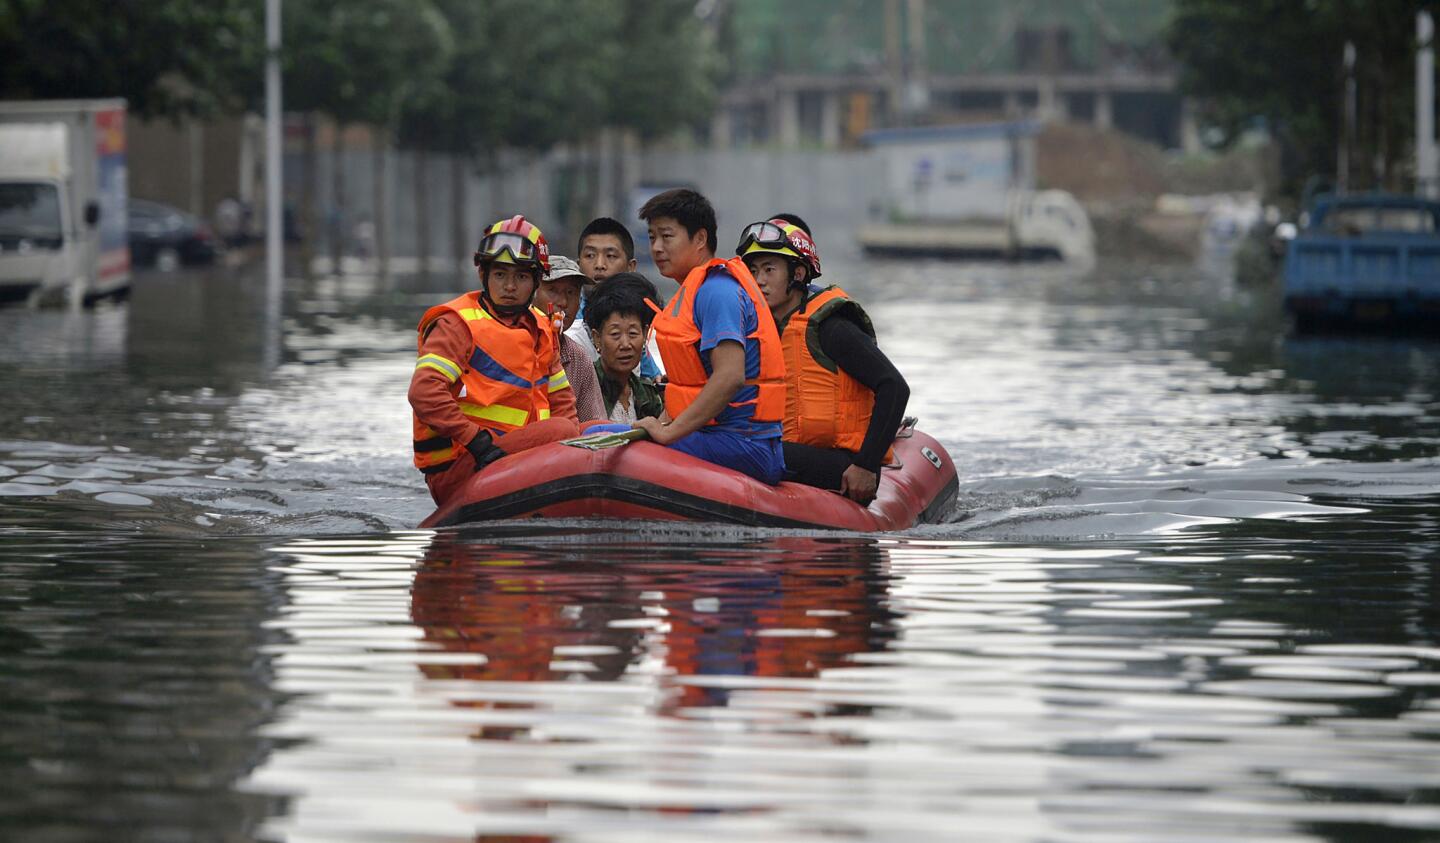 Rescuers transport people along a flooded street in Shenyang in northeastern China's Liaoning Province.